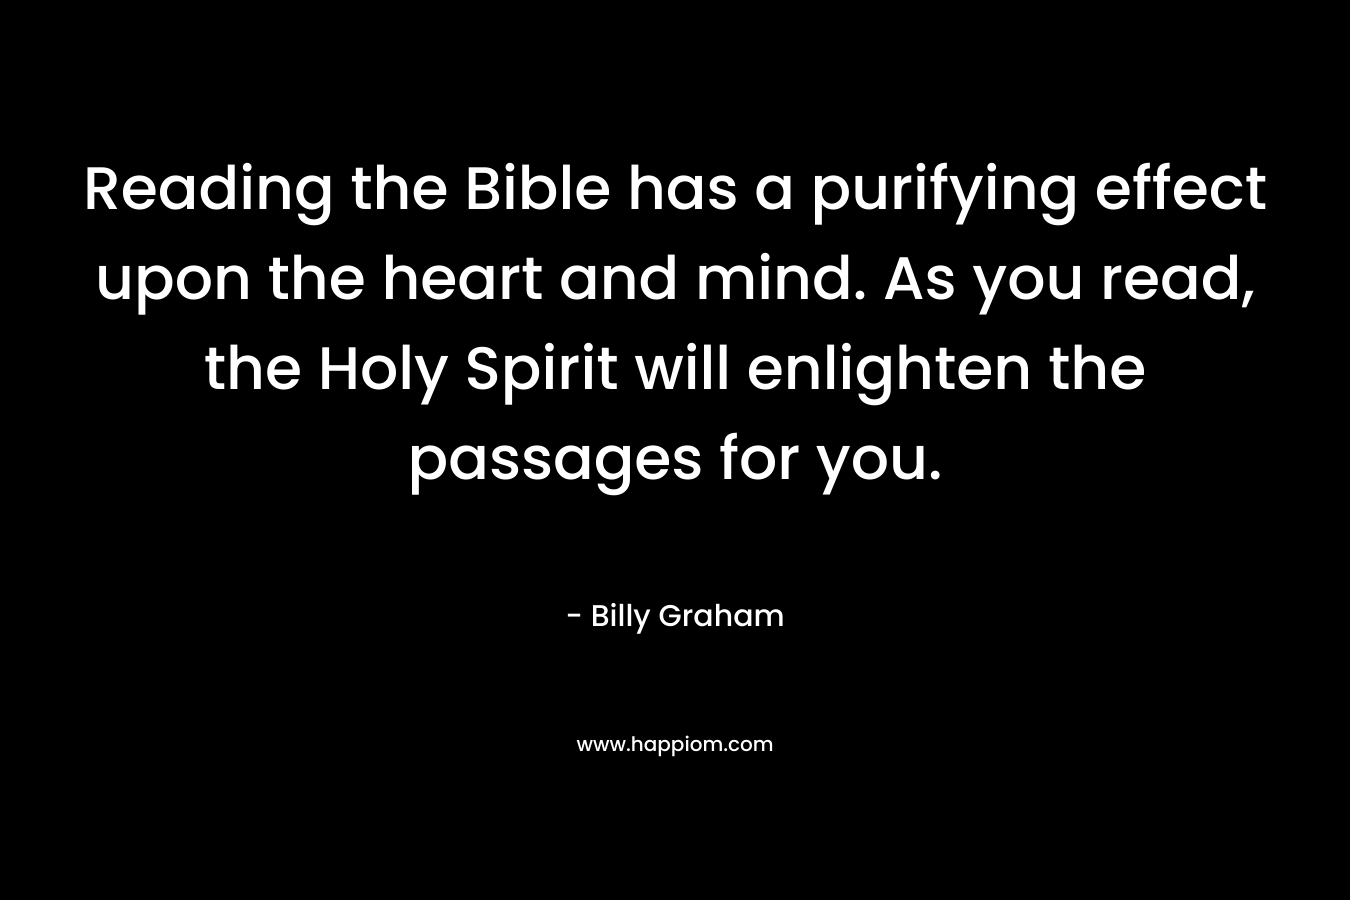 Reading the Bible has a purifying effect upon the heart and mind. As you read, the Holy Spirit will enlighten the passages for you. – Billy Graham